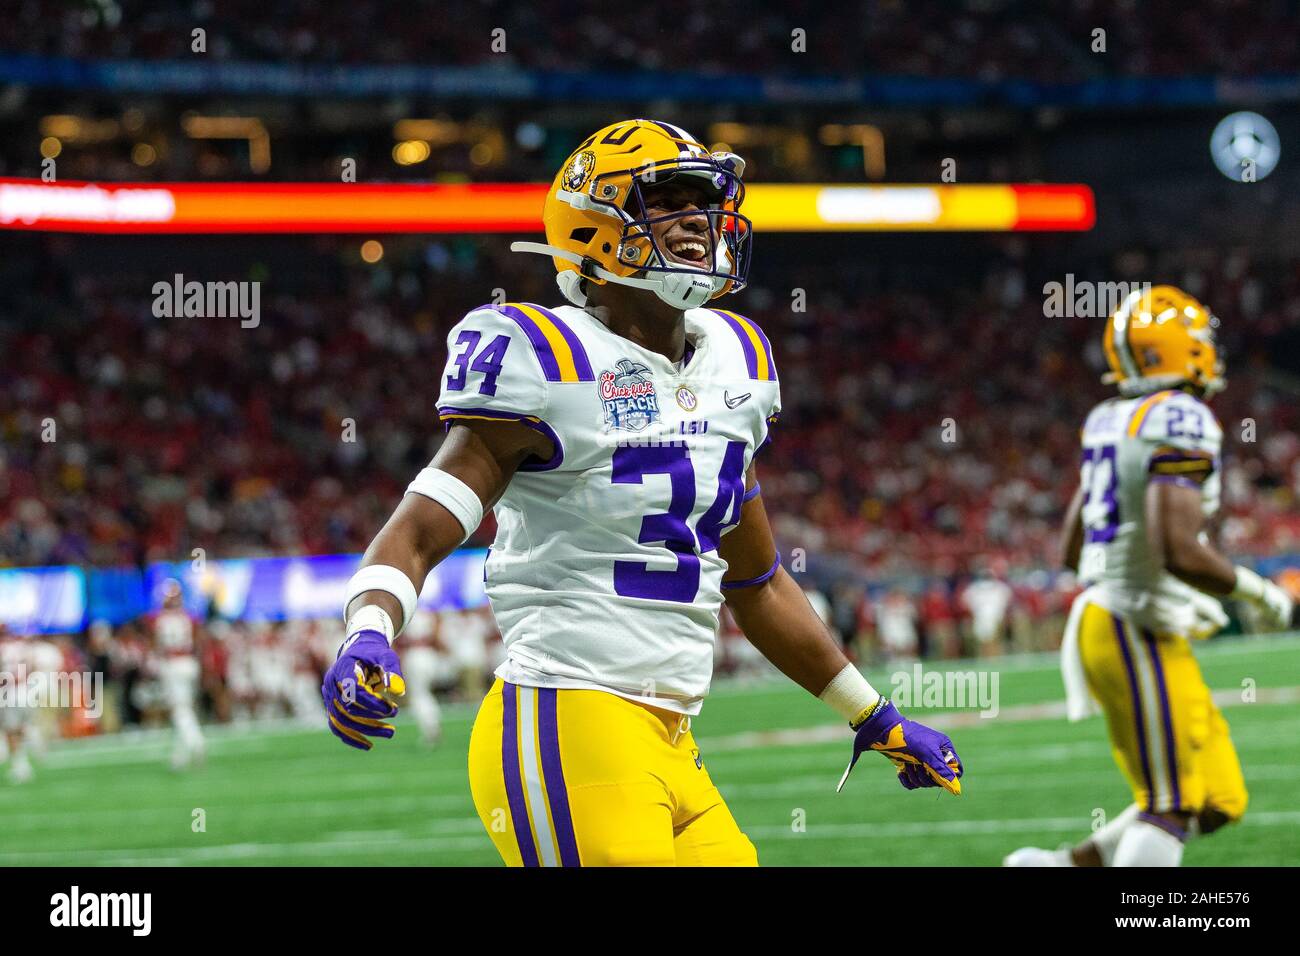 Atlanta, GA, USA. 28th Dec, 2019. LSU Tigers cornerback Lloyd Cole (34) gets excited after another kickoff against the Oklahoma Sooners in the 52nd Chick-fil-a Peach Bowl at Mercedes-Benz Stadium in Atlanta, GA. (Scott Kinser/Cal Sport Media). Credit: csm/Alamy Live News Stock Photo